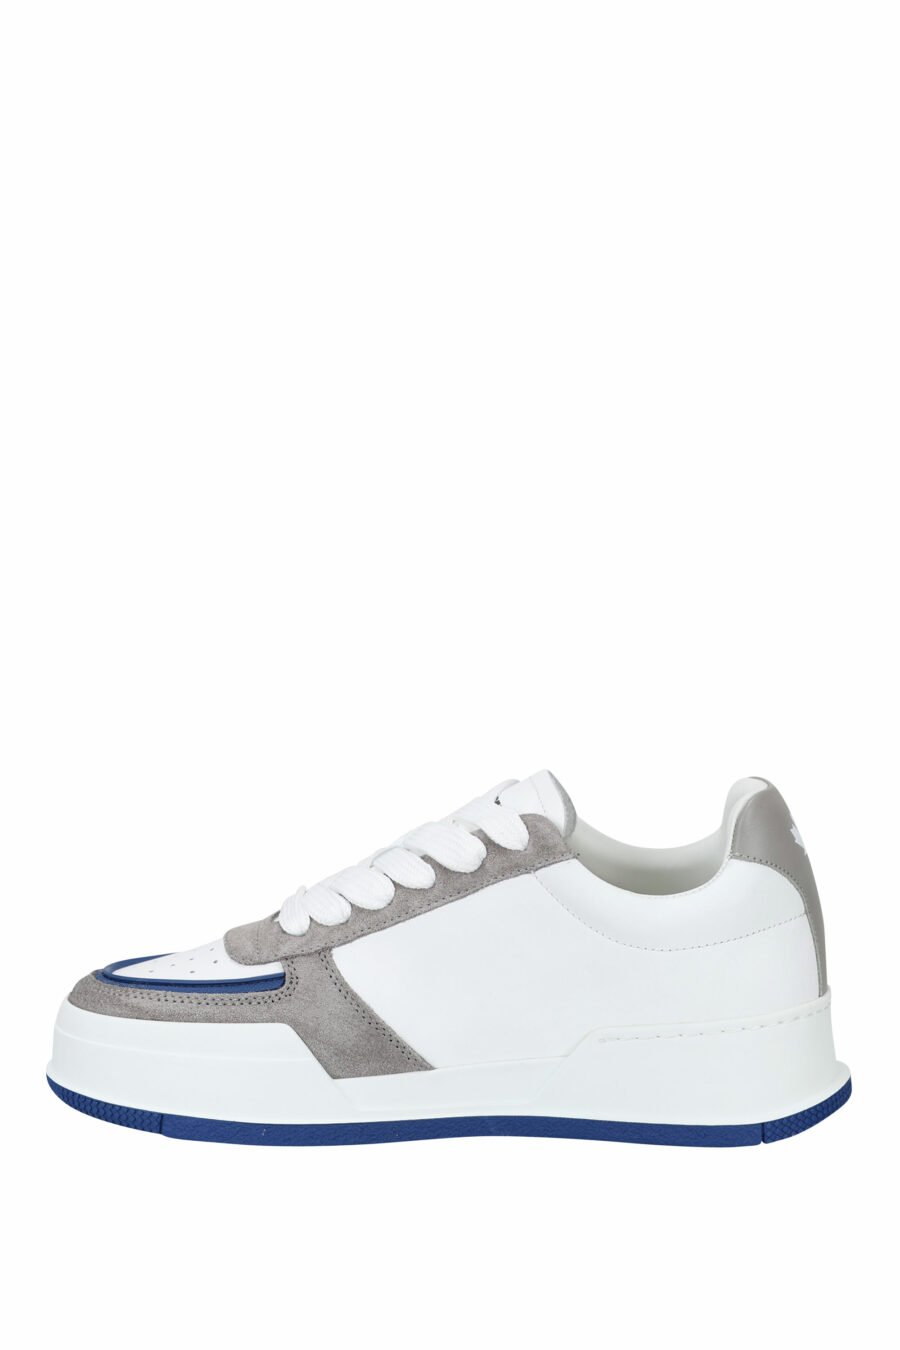 Trainers white mix with grey, blue and red leaf logo - 8055777242216 2